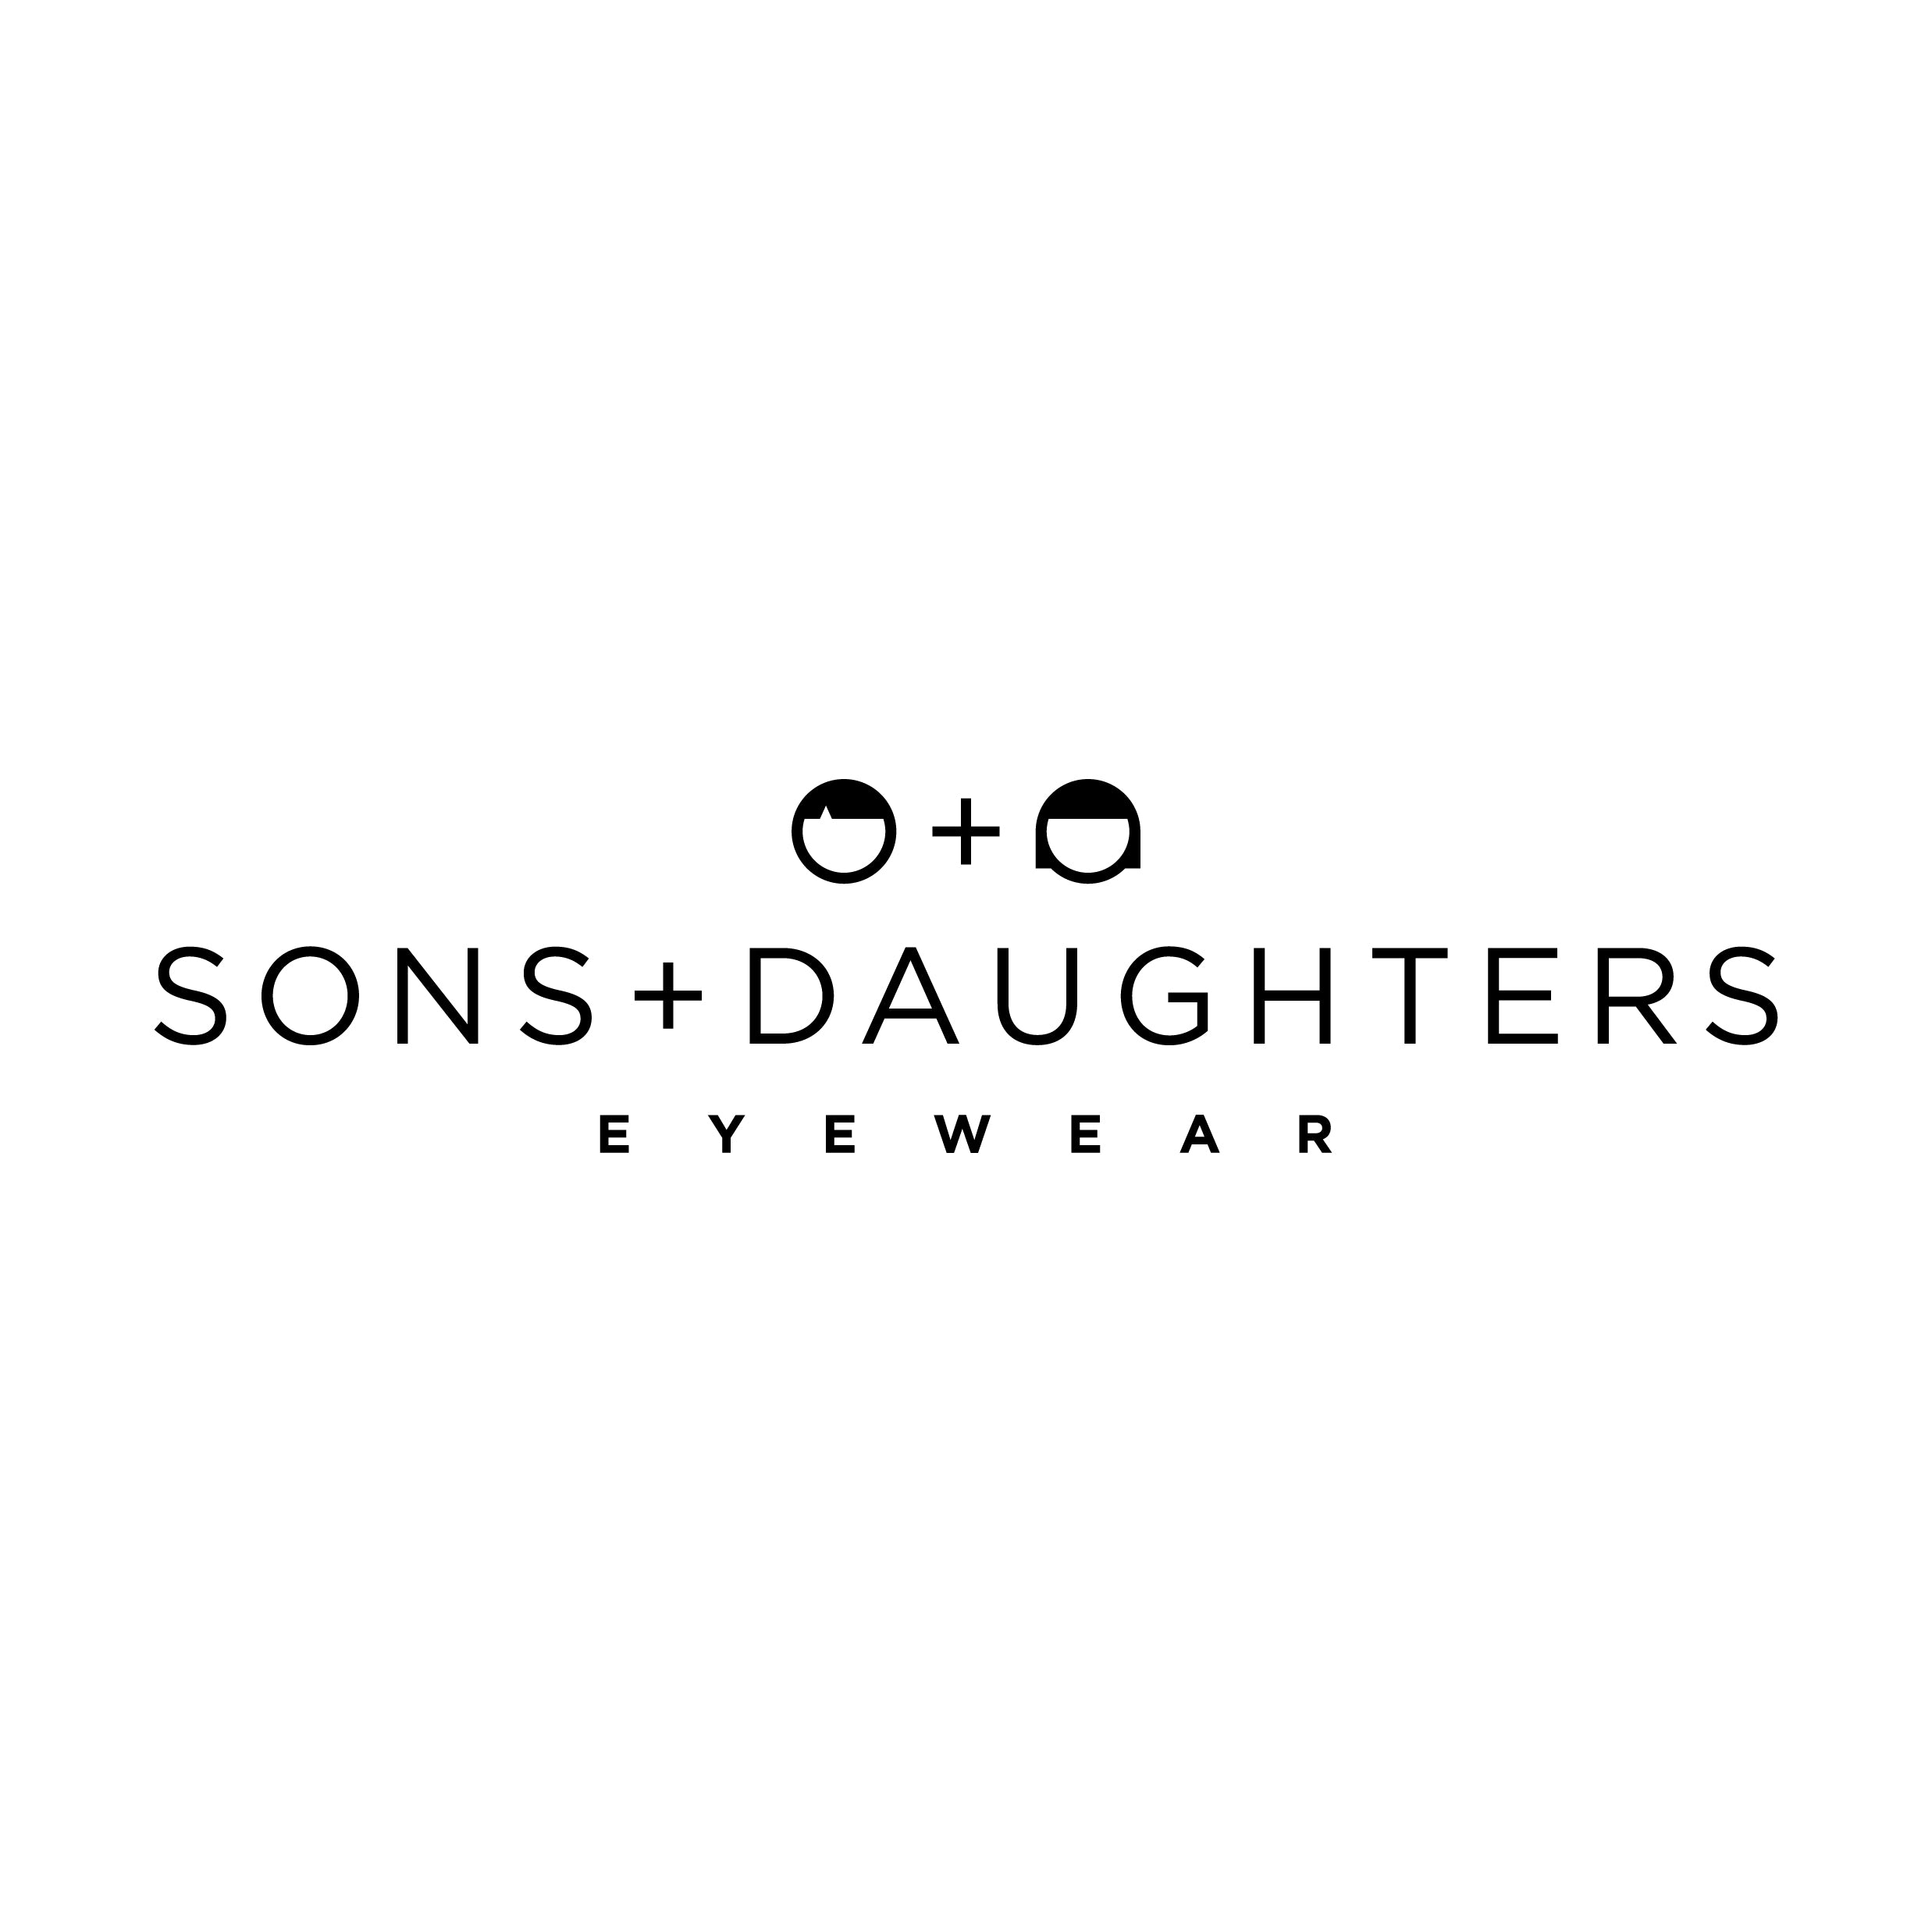 Sons + Daughters